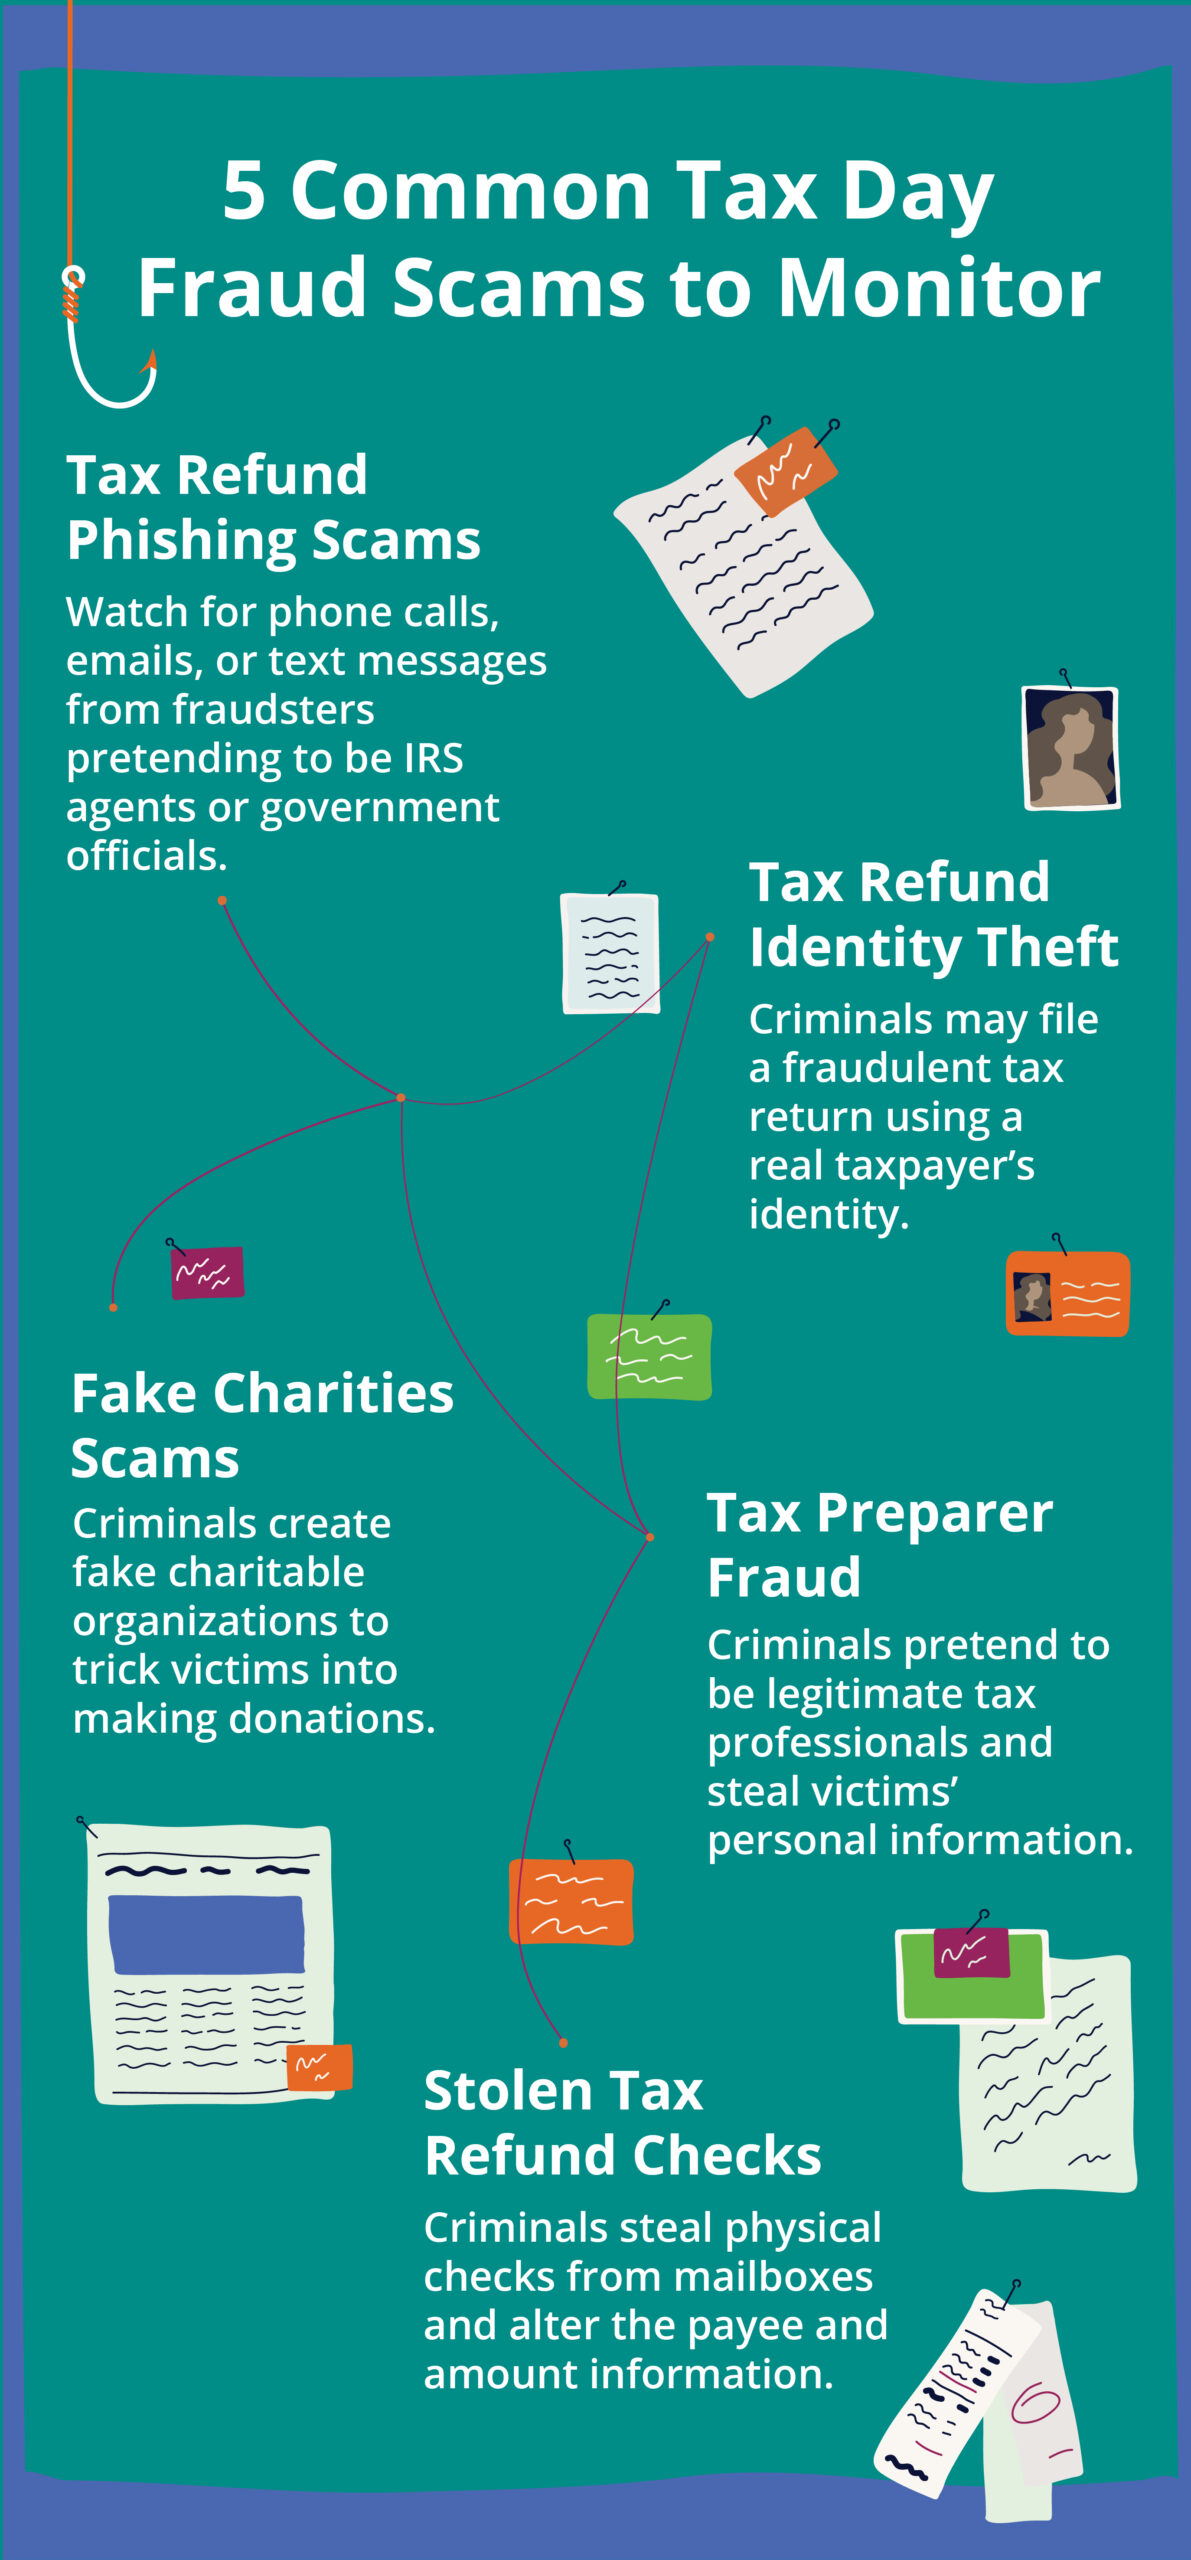 5 Common Tax Day Fraud Scams to Monitor. 1. Tax Refund Phishing Scams; 2. ;Tax Refund Identity Theft; 3. Tax Preparer Fraud; 4. Fake Charities Scams; 5. Stolen Tax Refund Checks